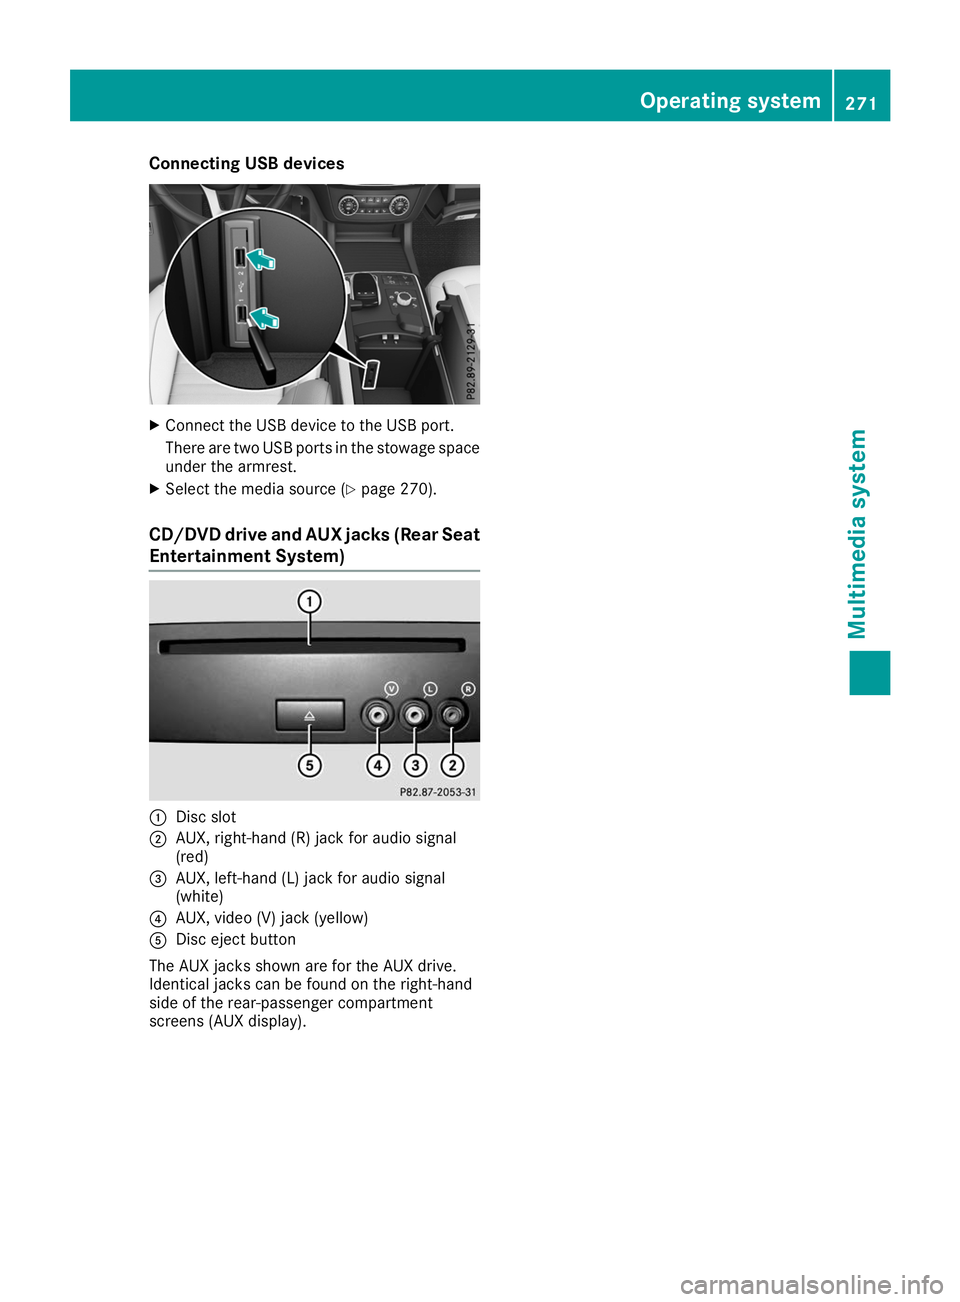 MERCEDES-BENZ GLE COUPE 2019  Owners Manual Connecting USB devices
X
Connect the USB device to the USB port.
There are two USB ports in the stowage space under the armrest.
X Select the media source (Y page 270).
CD/DVD drive and AUX jacks (Rea